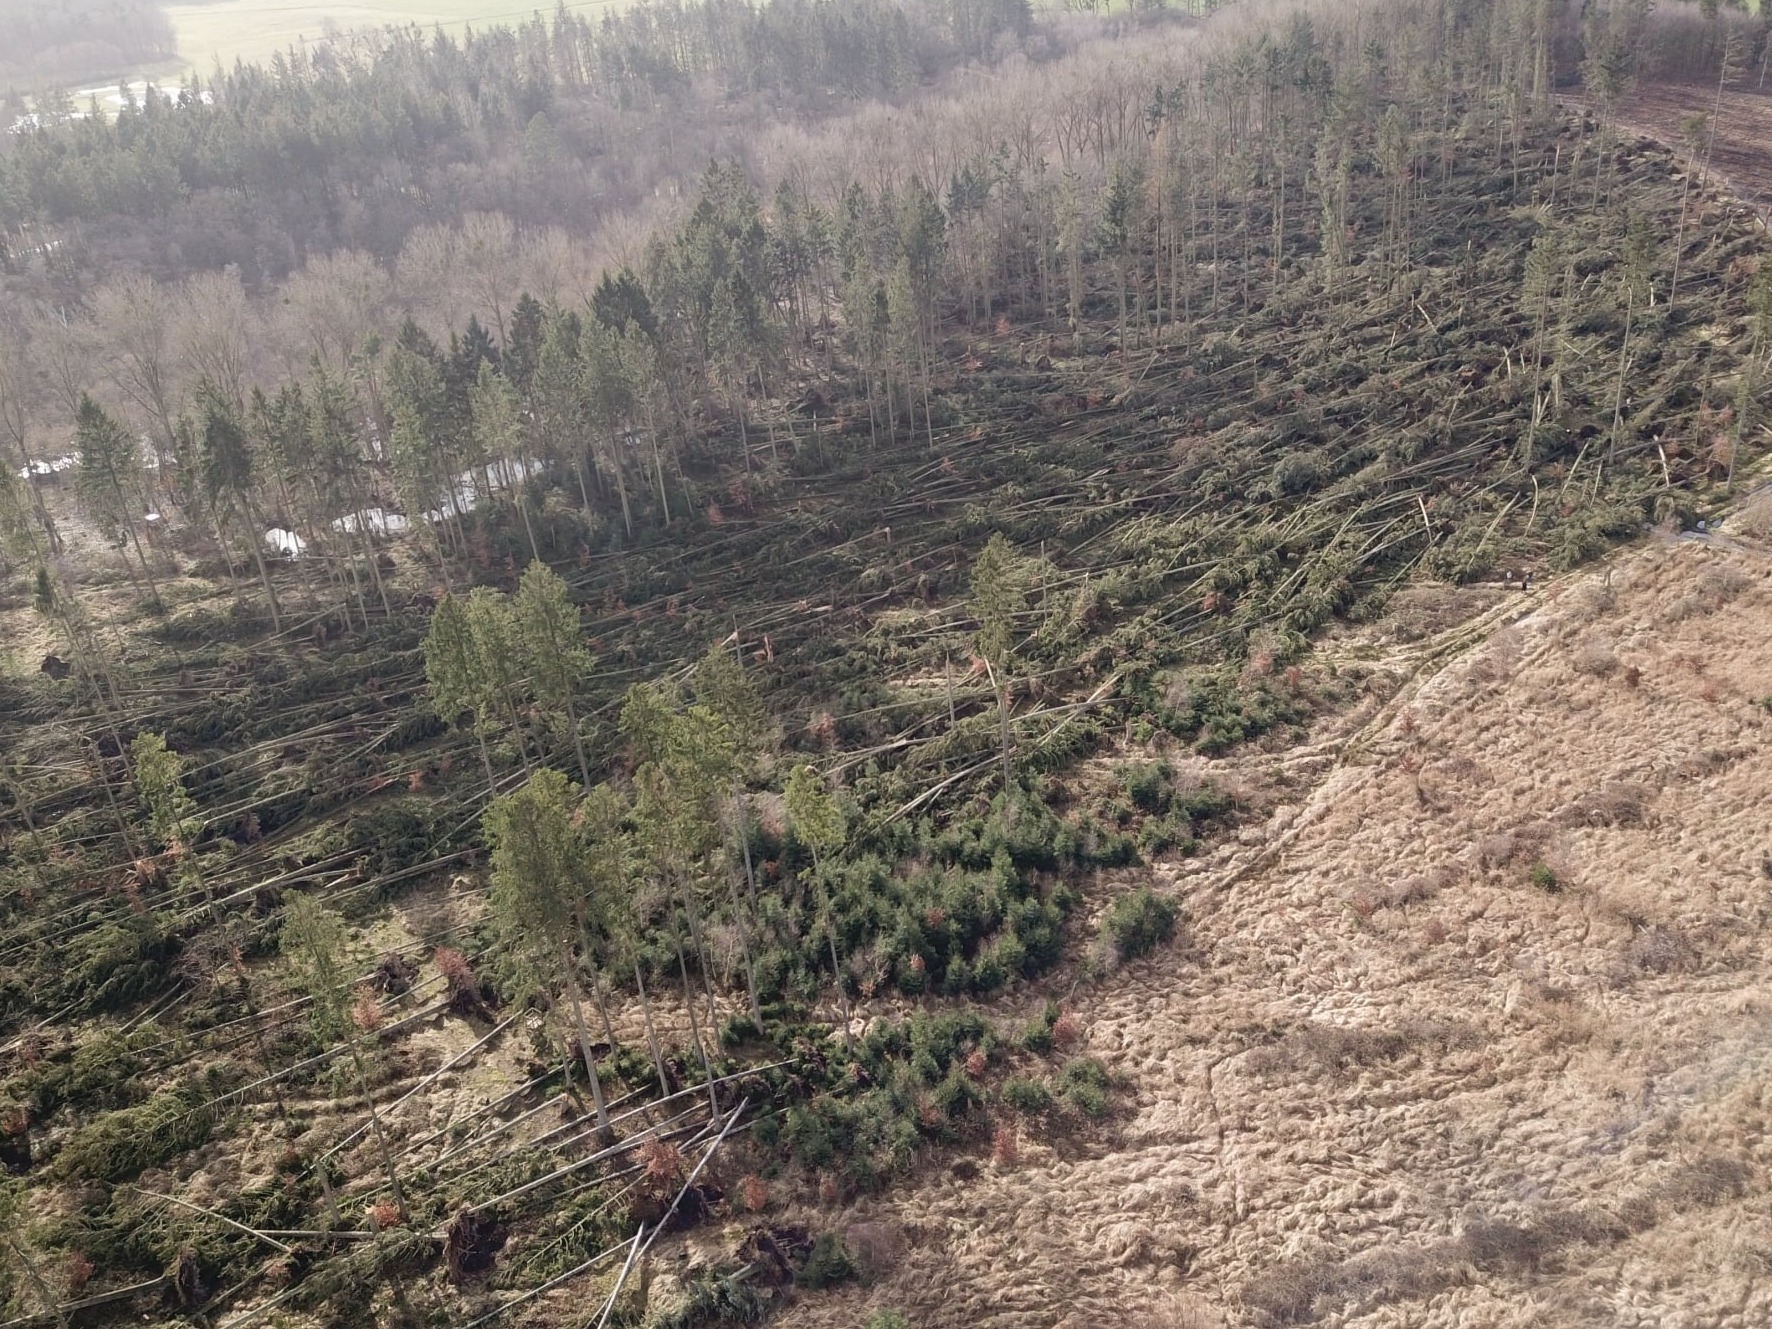 Windthrow damages caused by a the winter storm in January 2022 in North-East Germany